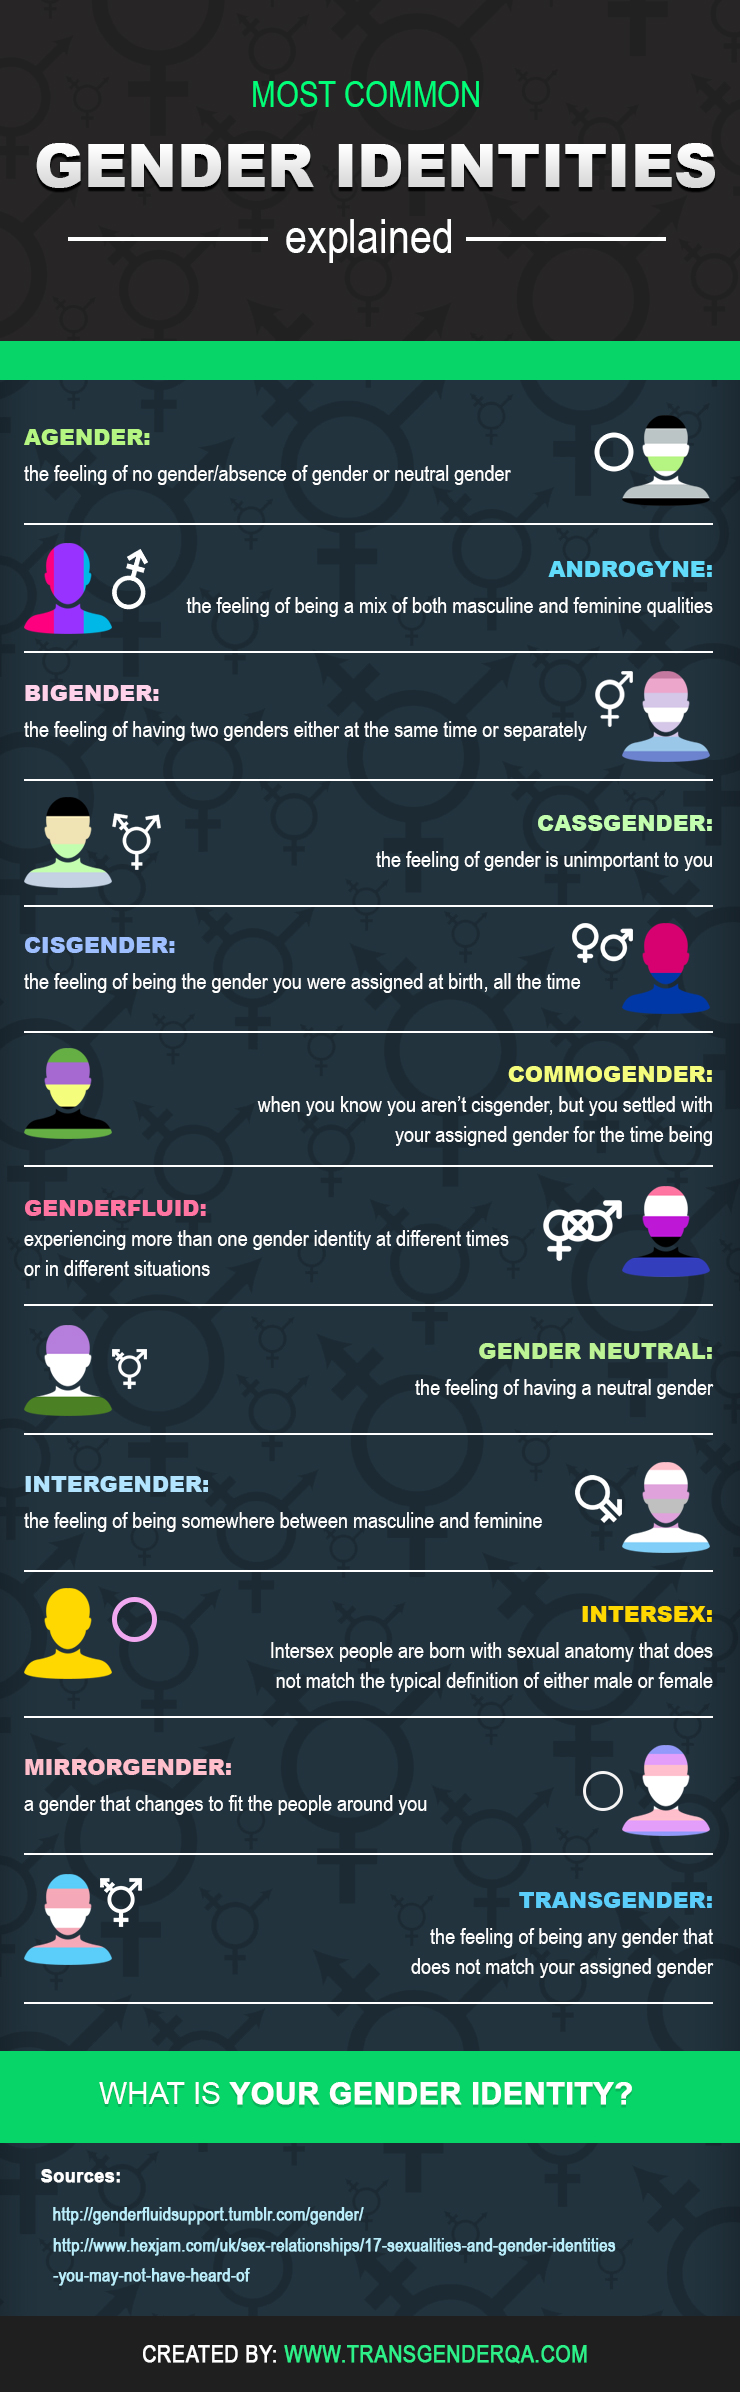 Most Common Gender Identities Explained